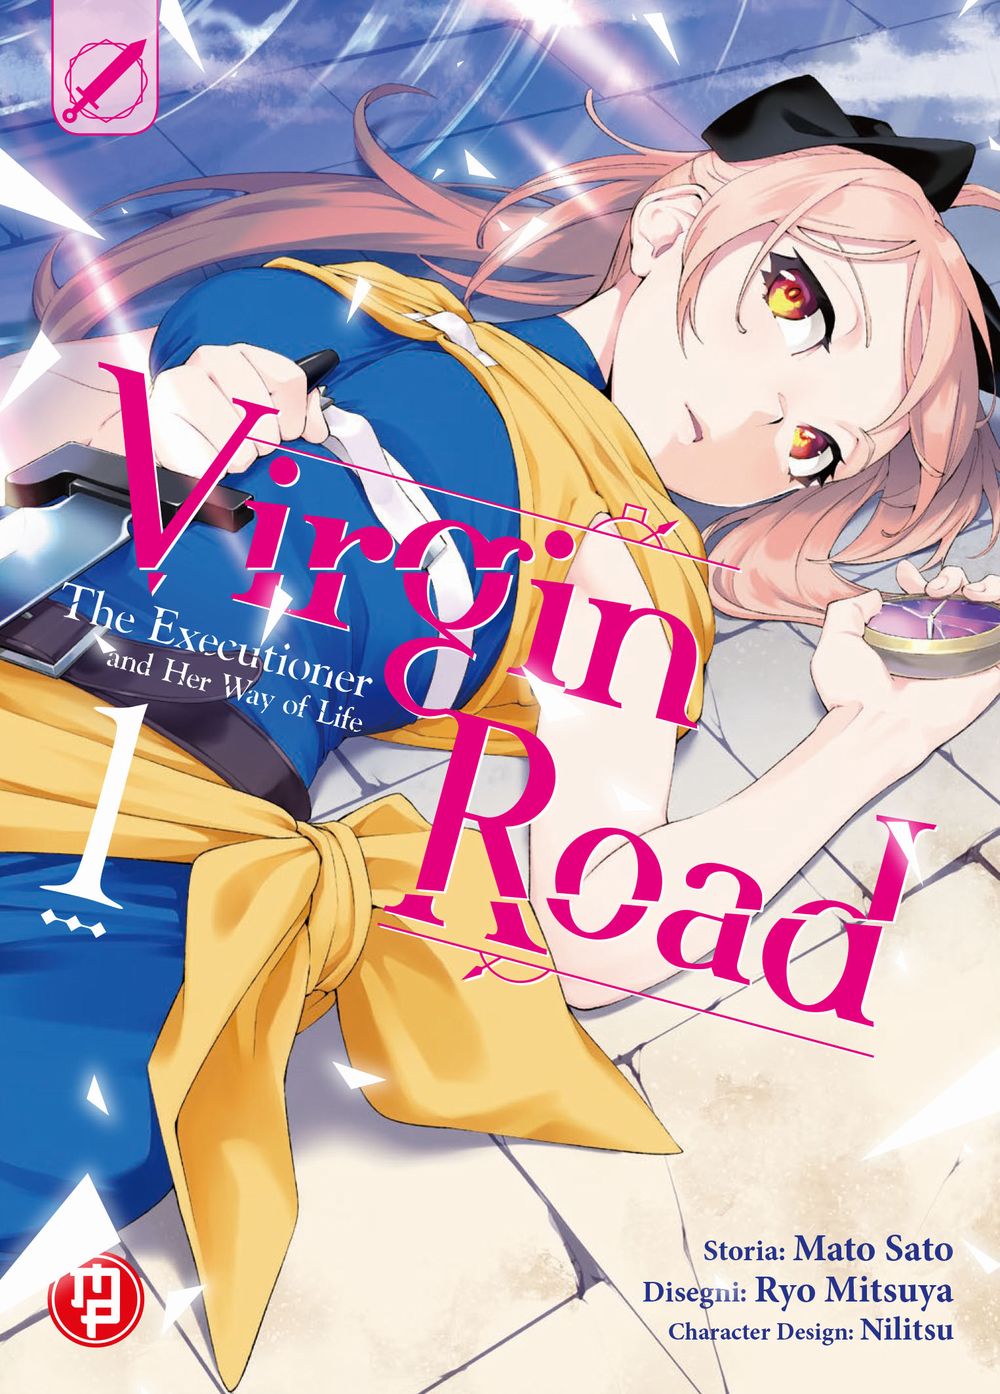 Virgin Road – The Executioner and Her Way of Life: il manga si conclude il 19 aprile!